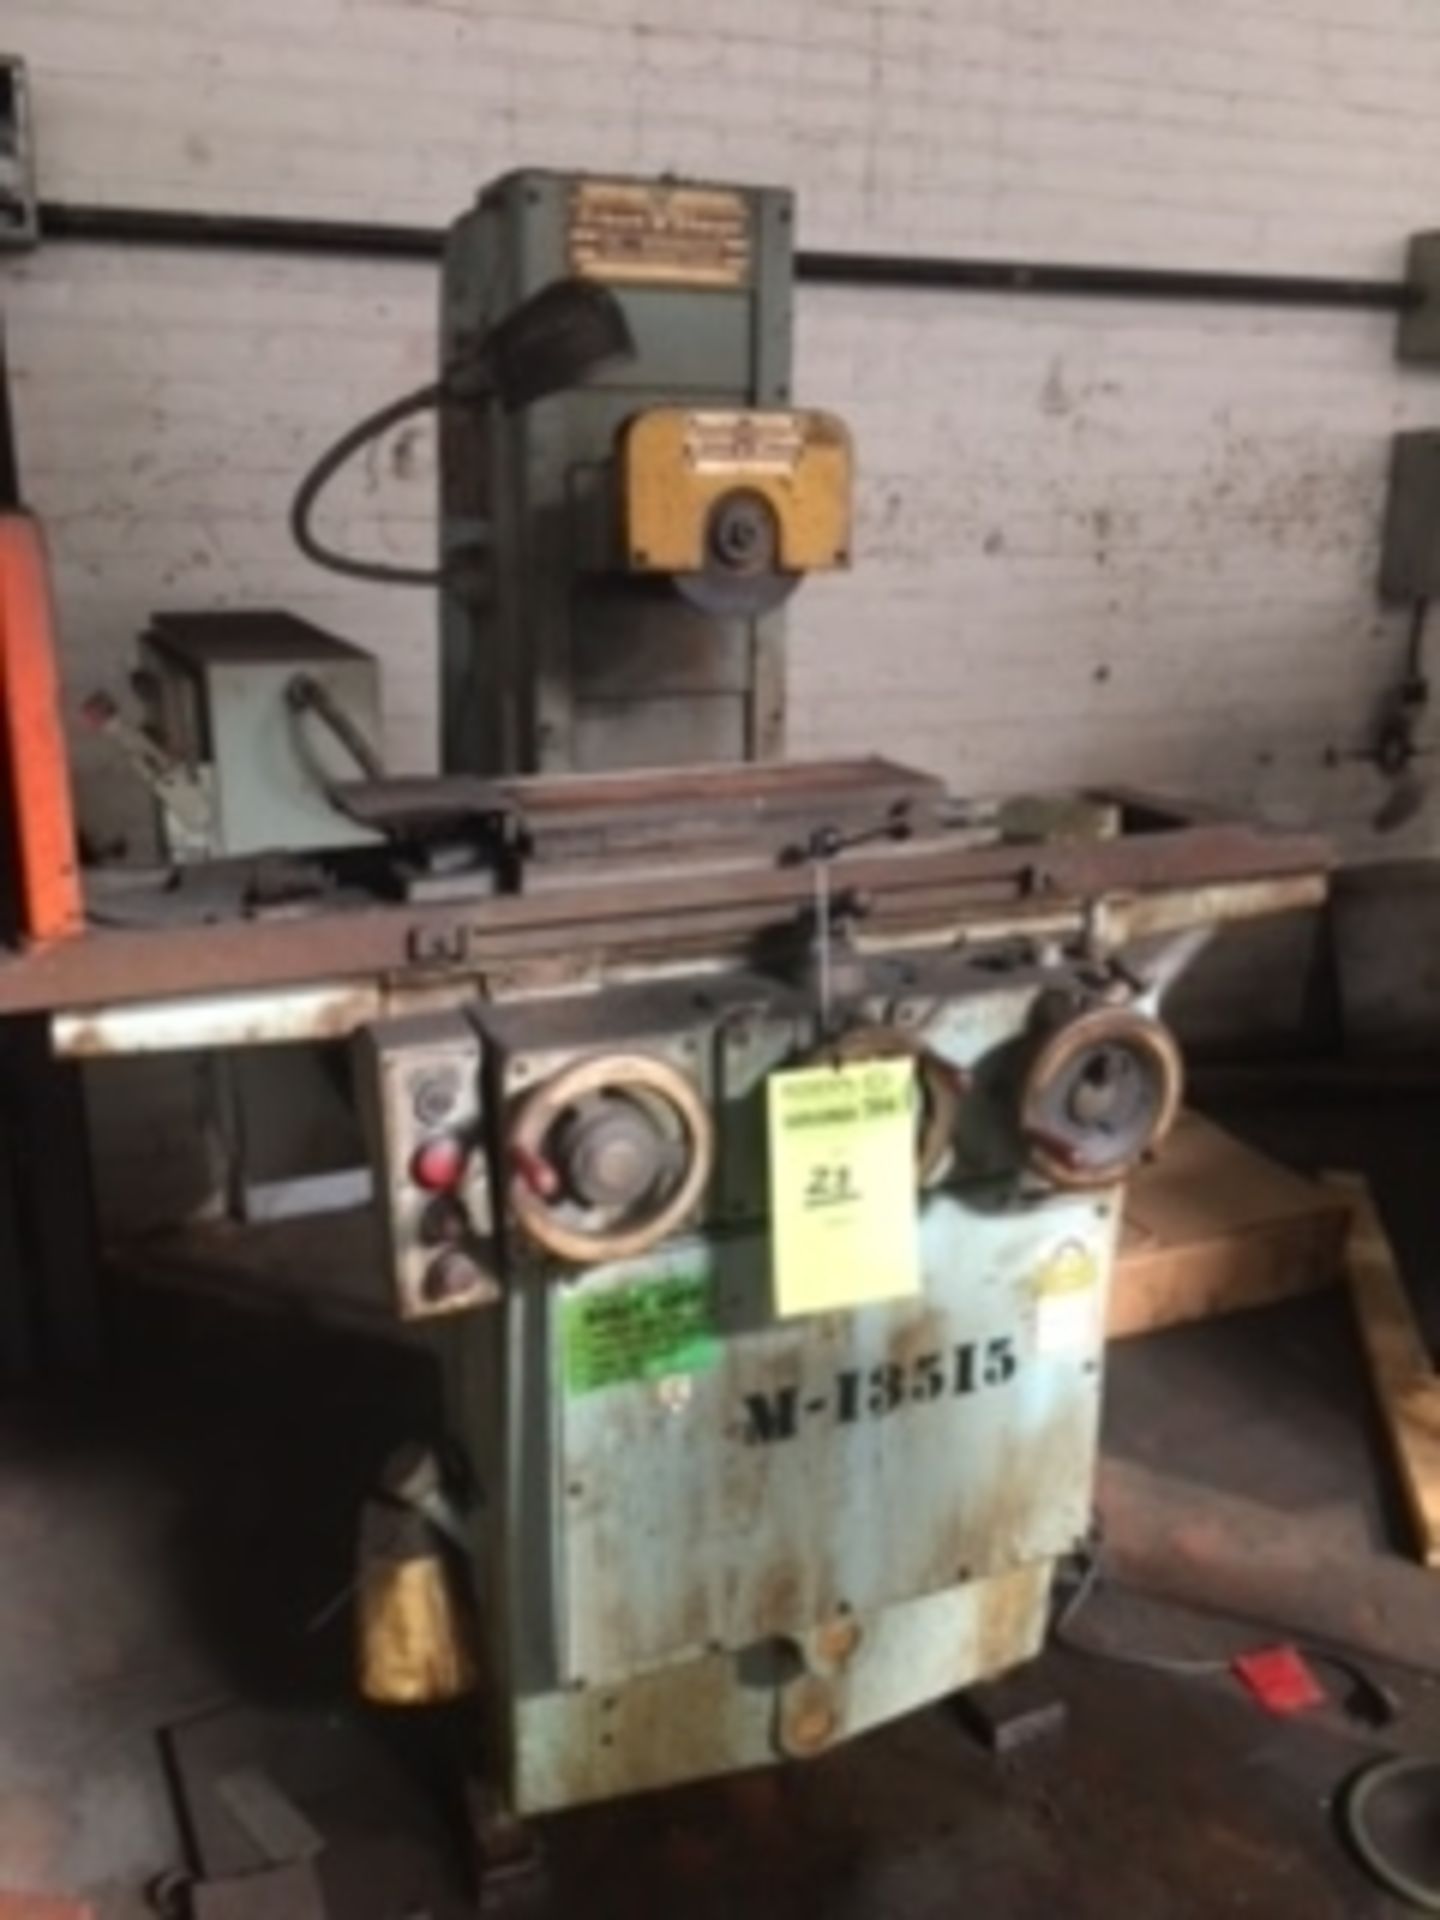 Brown and Sharpe surface grinding machine, model 618 micromaster, serial 523-6180-4790, 6"